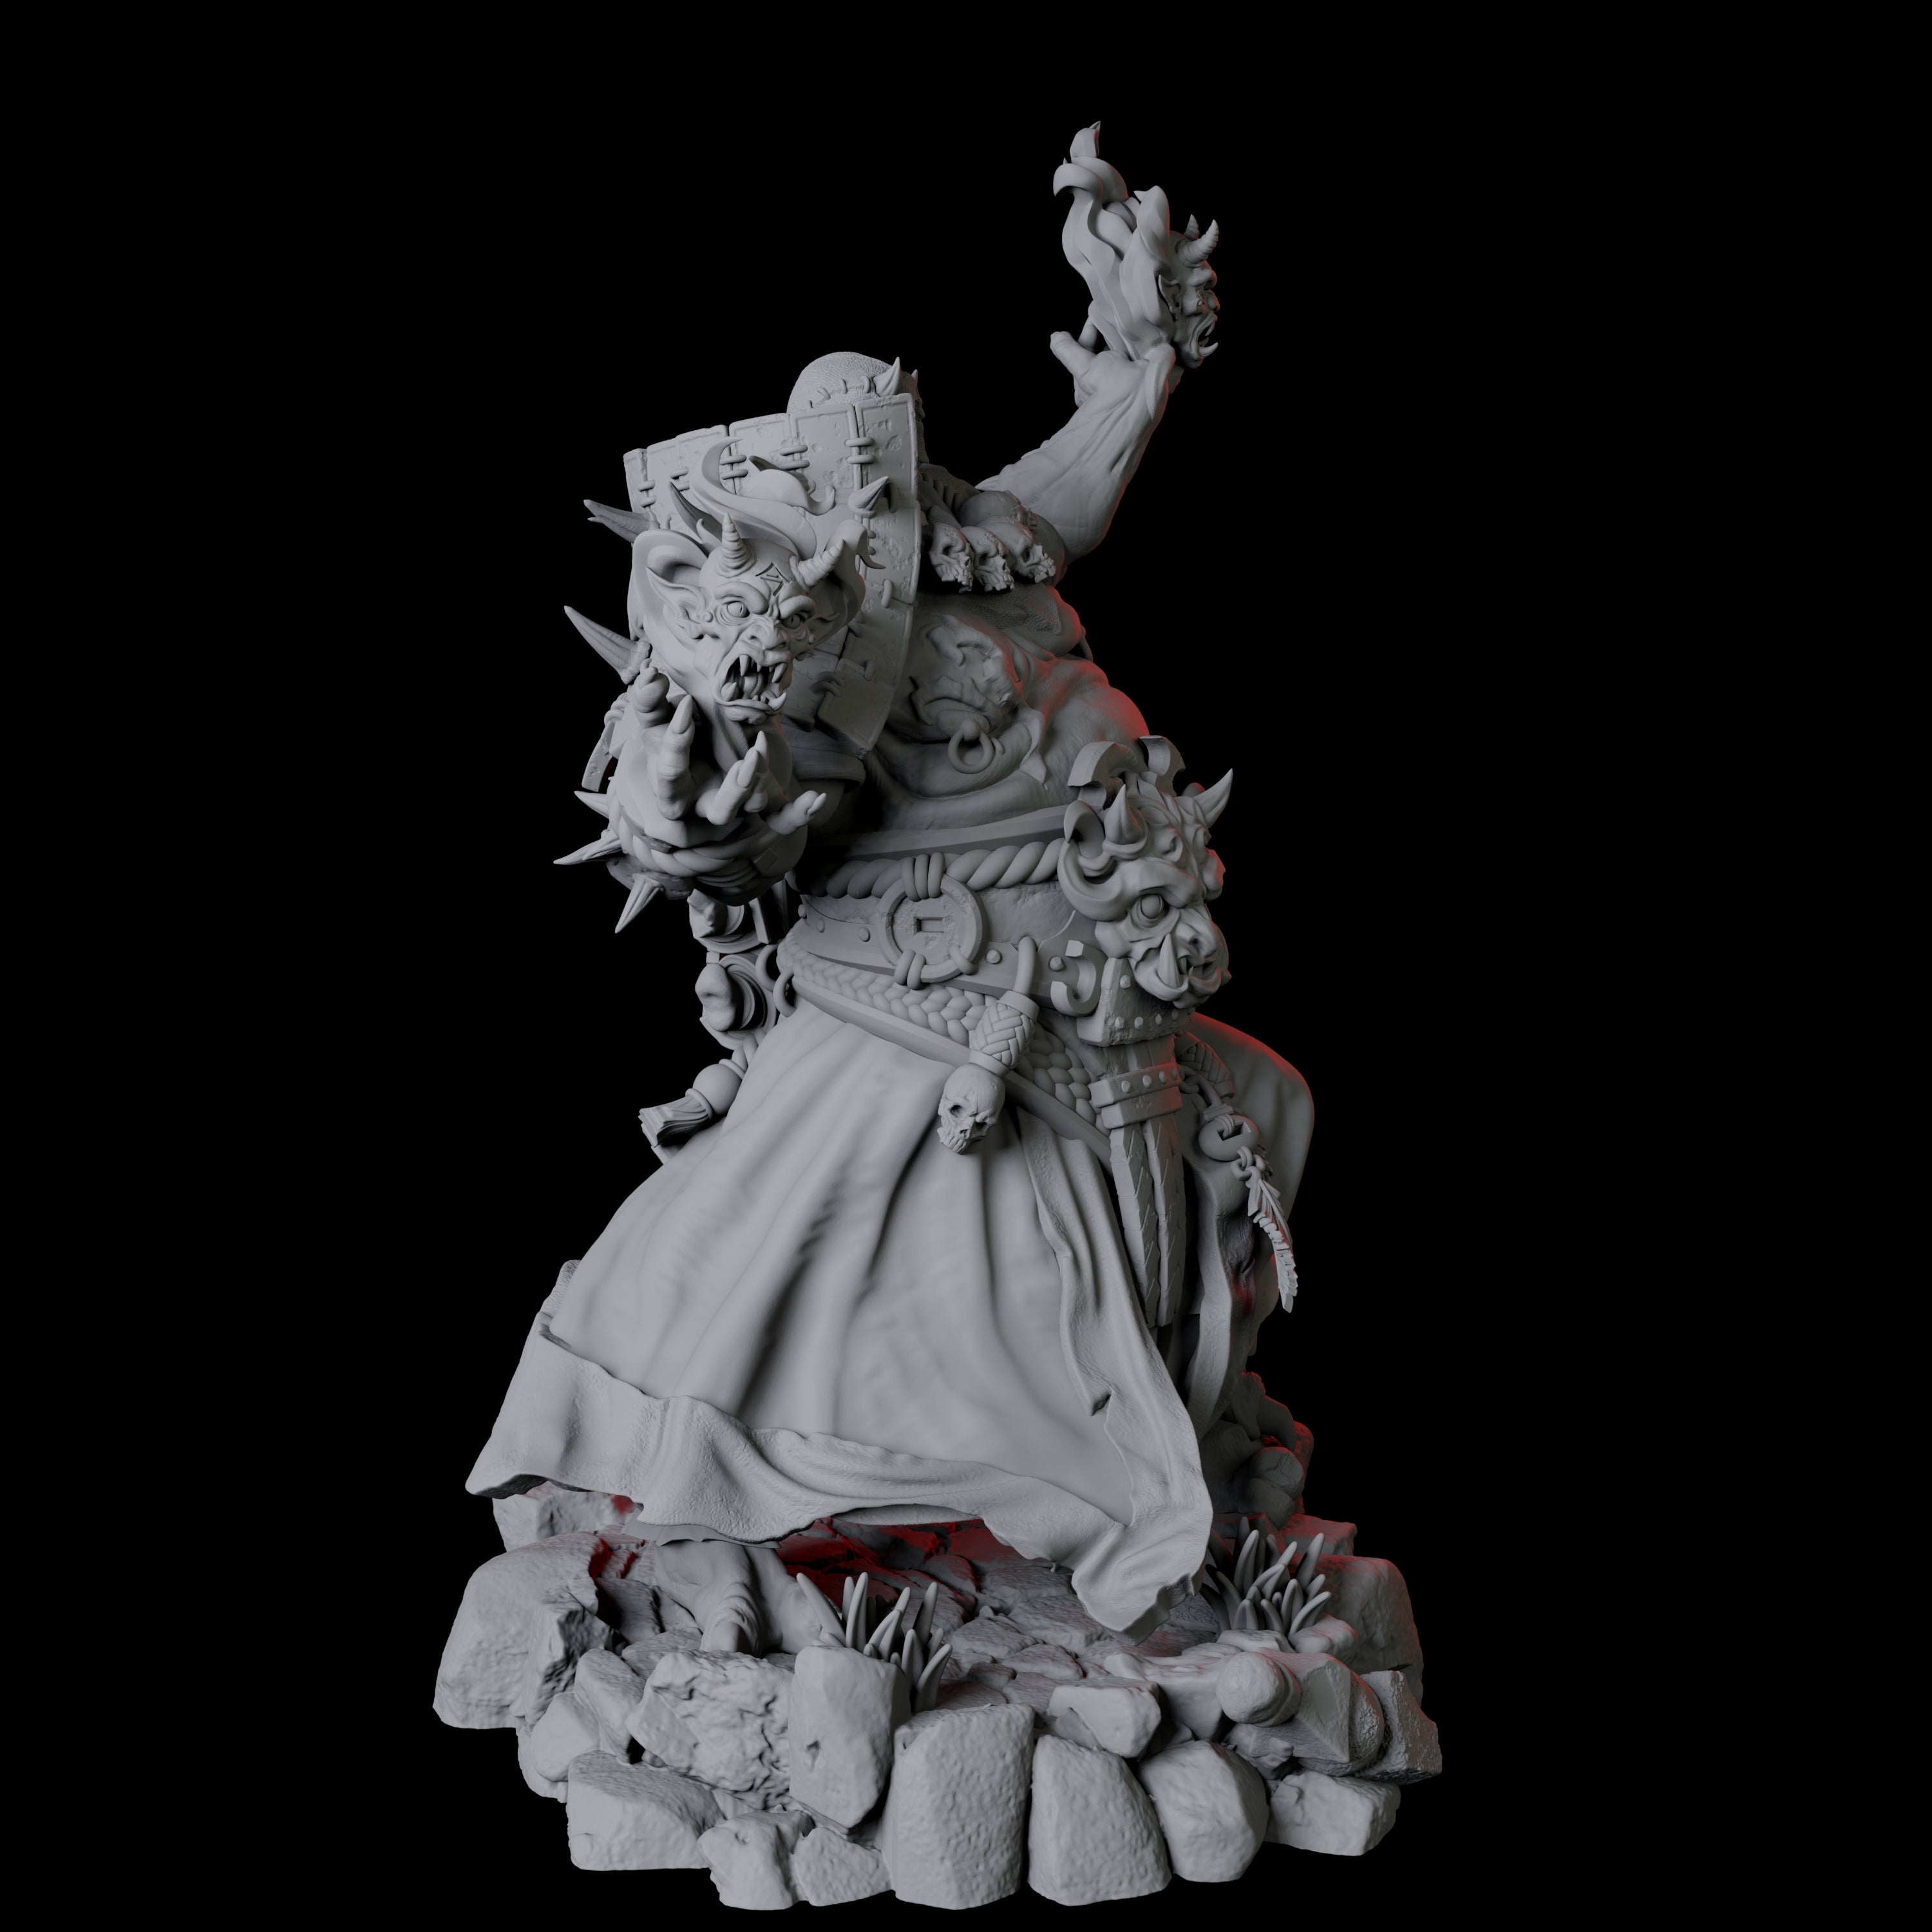 Towering Oni Demon C Miniature for Dungeons and Dragons, Pathfinder or other TTRPGs